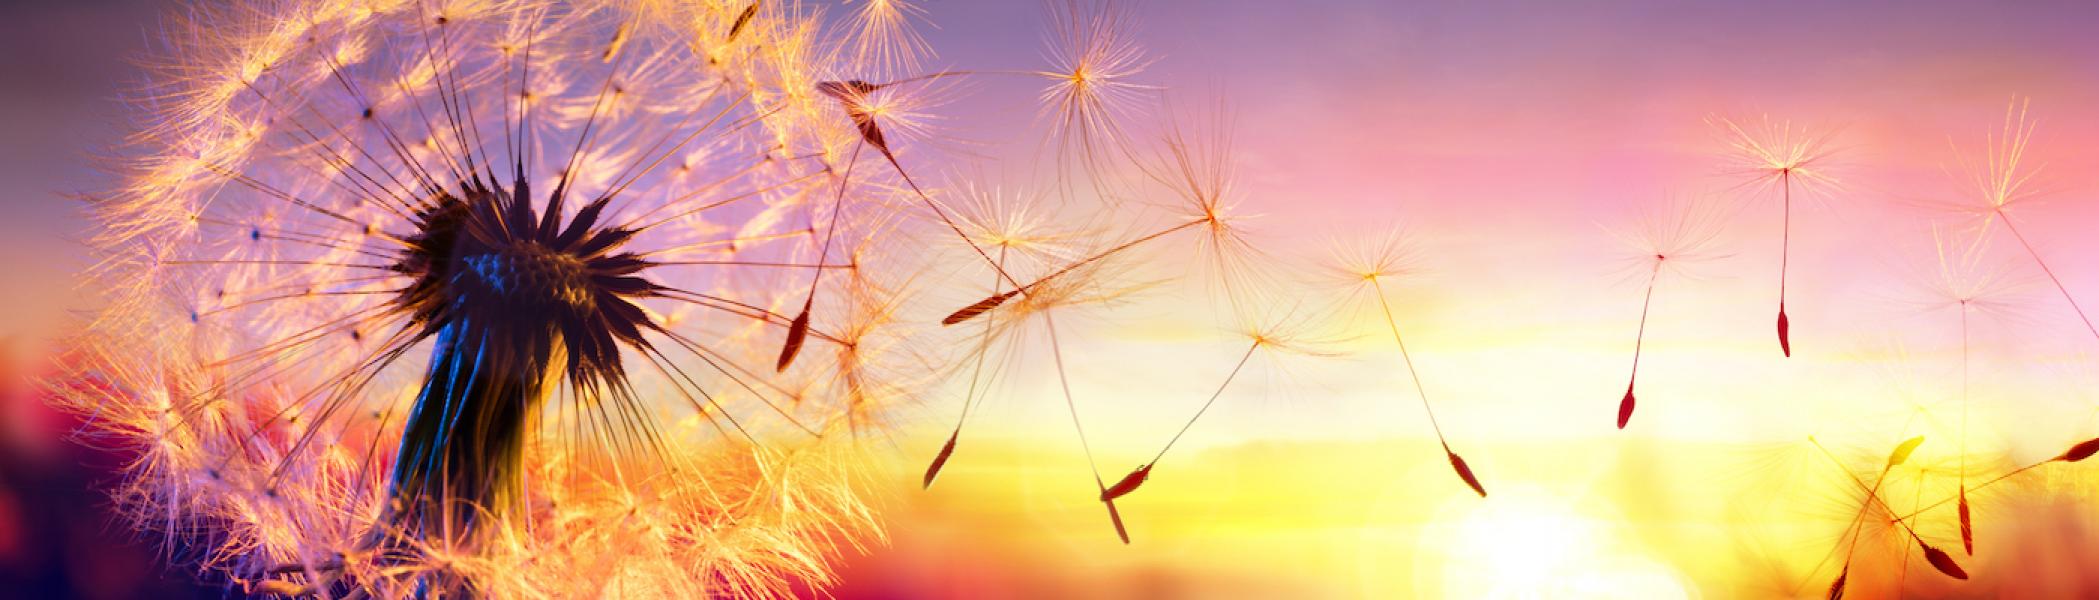 Dandelion blowing in the wind with a sunset in the background